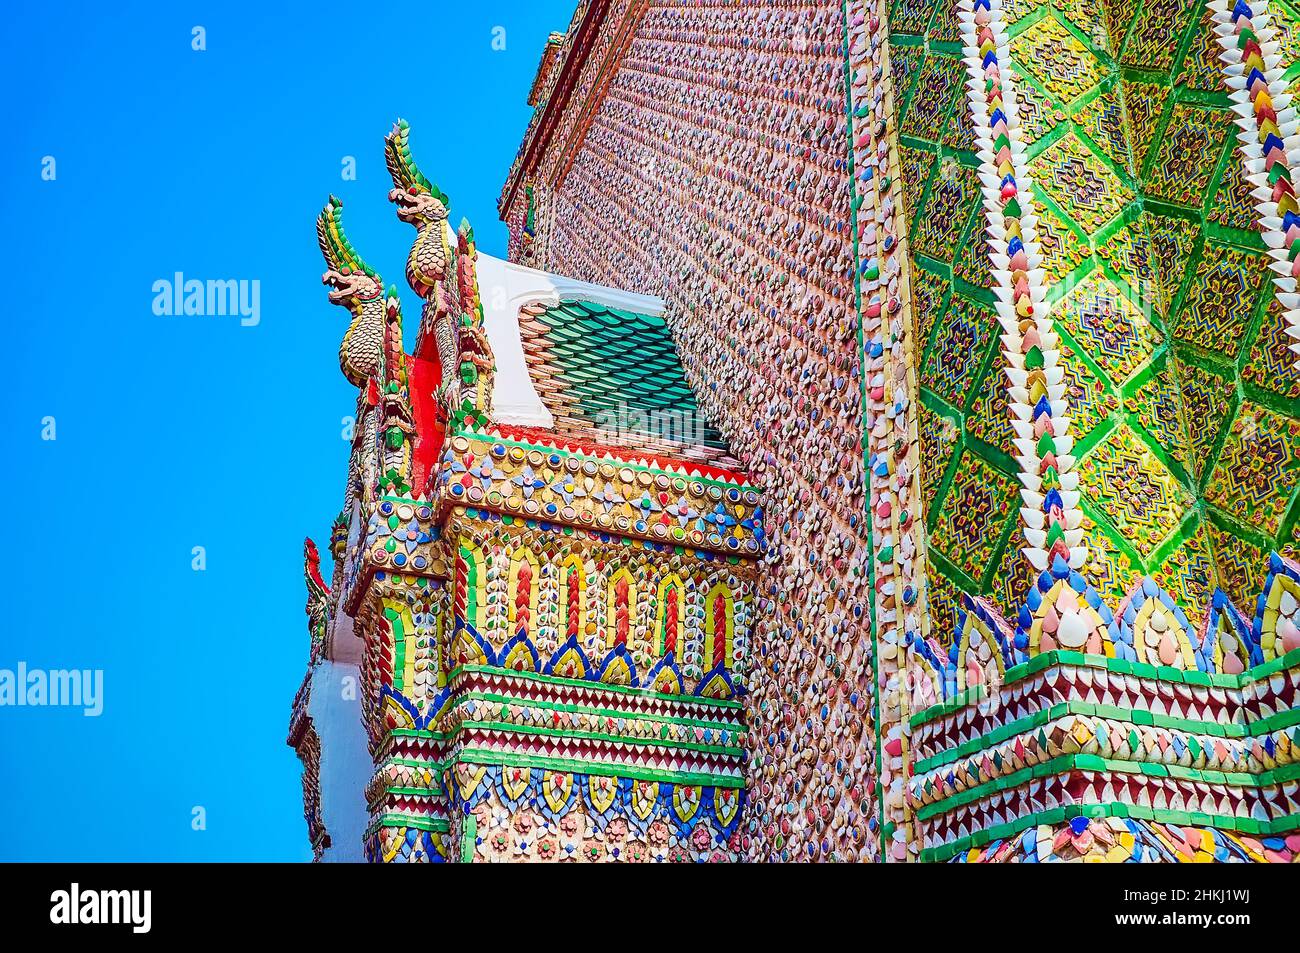 Ceramic tiles decoration of the facade of Ho Rakhang in typic Thai style with Nagas on ceilings, Grand Palace of Bangkok, Thailand Stock Photo